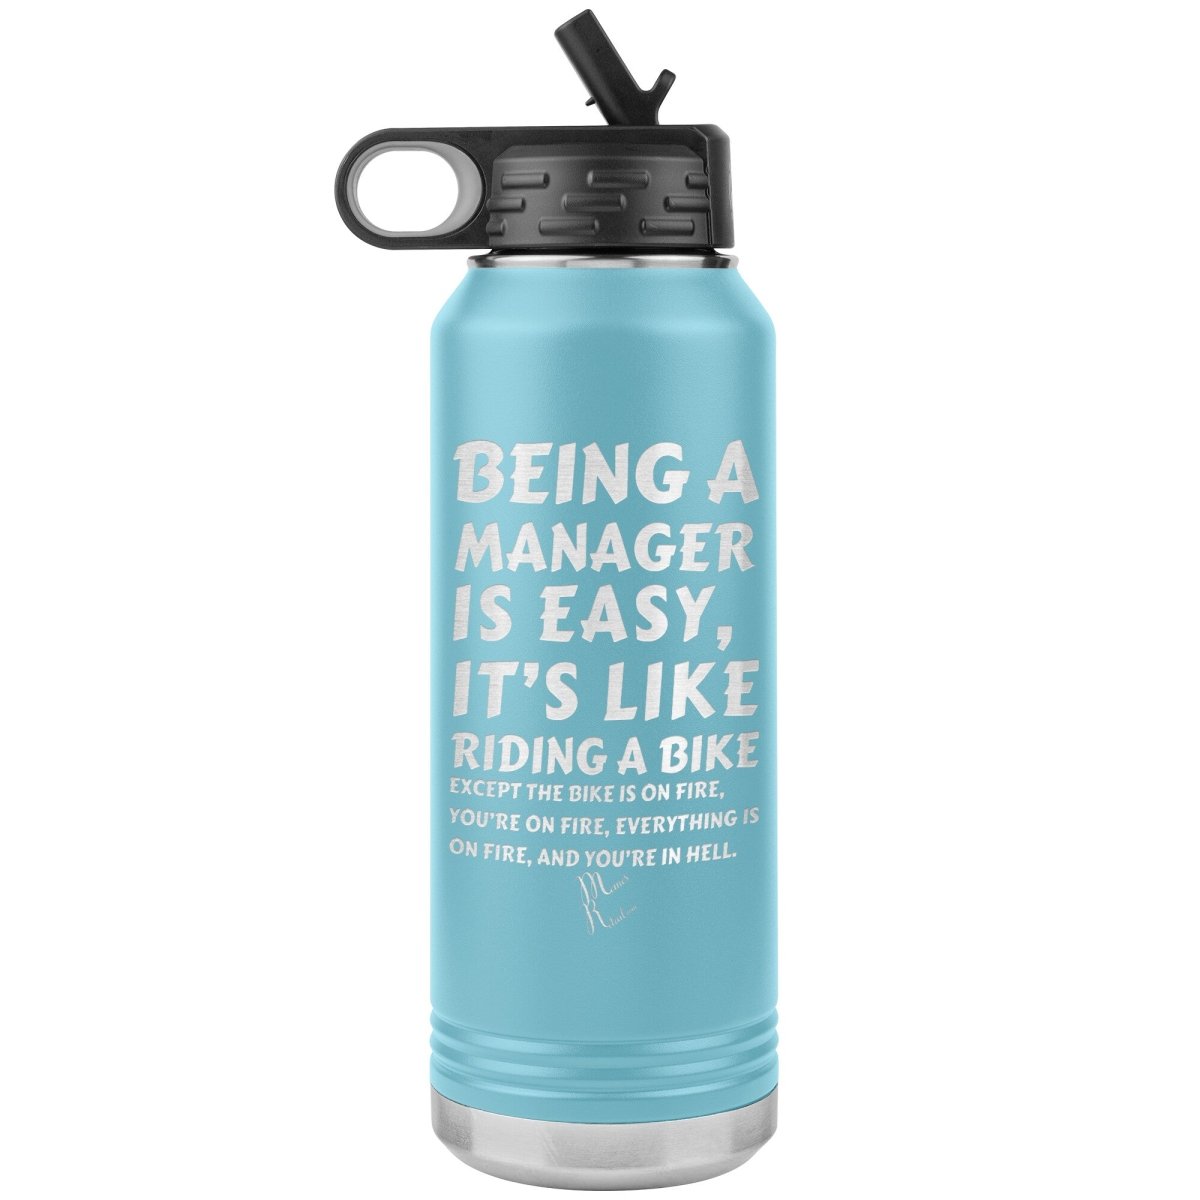 Being a manager is easy….32oz Water Tumbler, Light Blue - MemesRetail.com